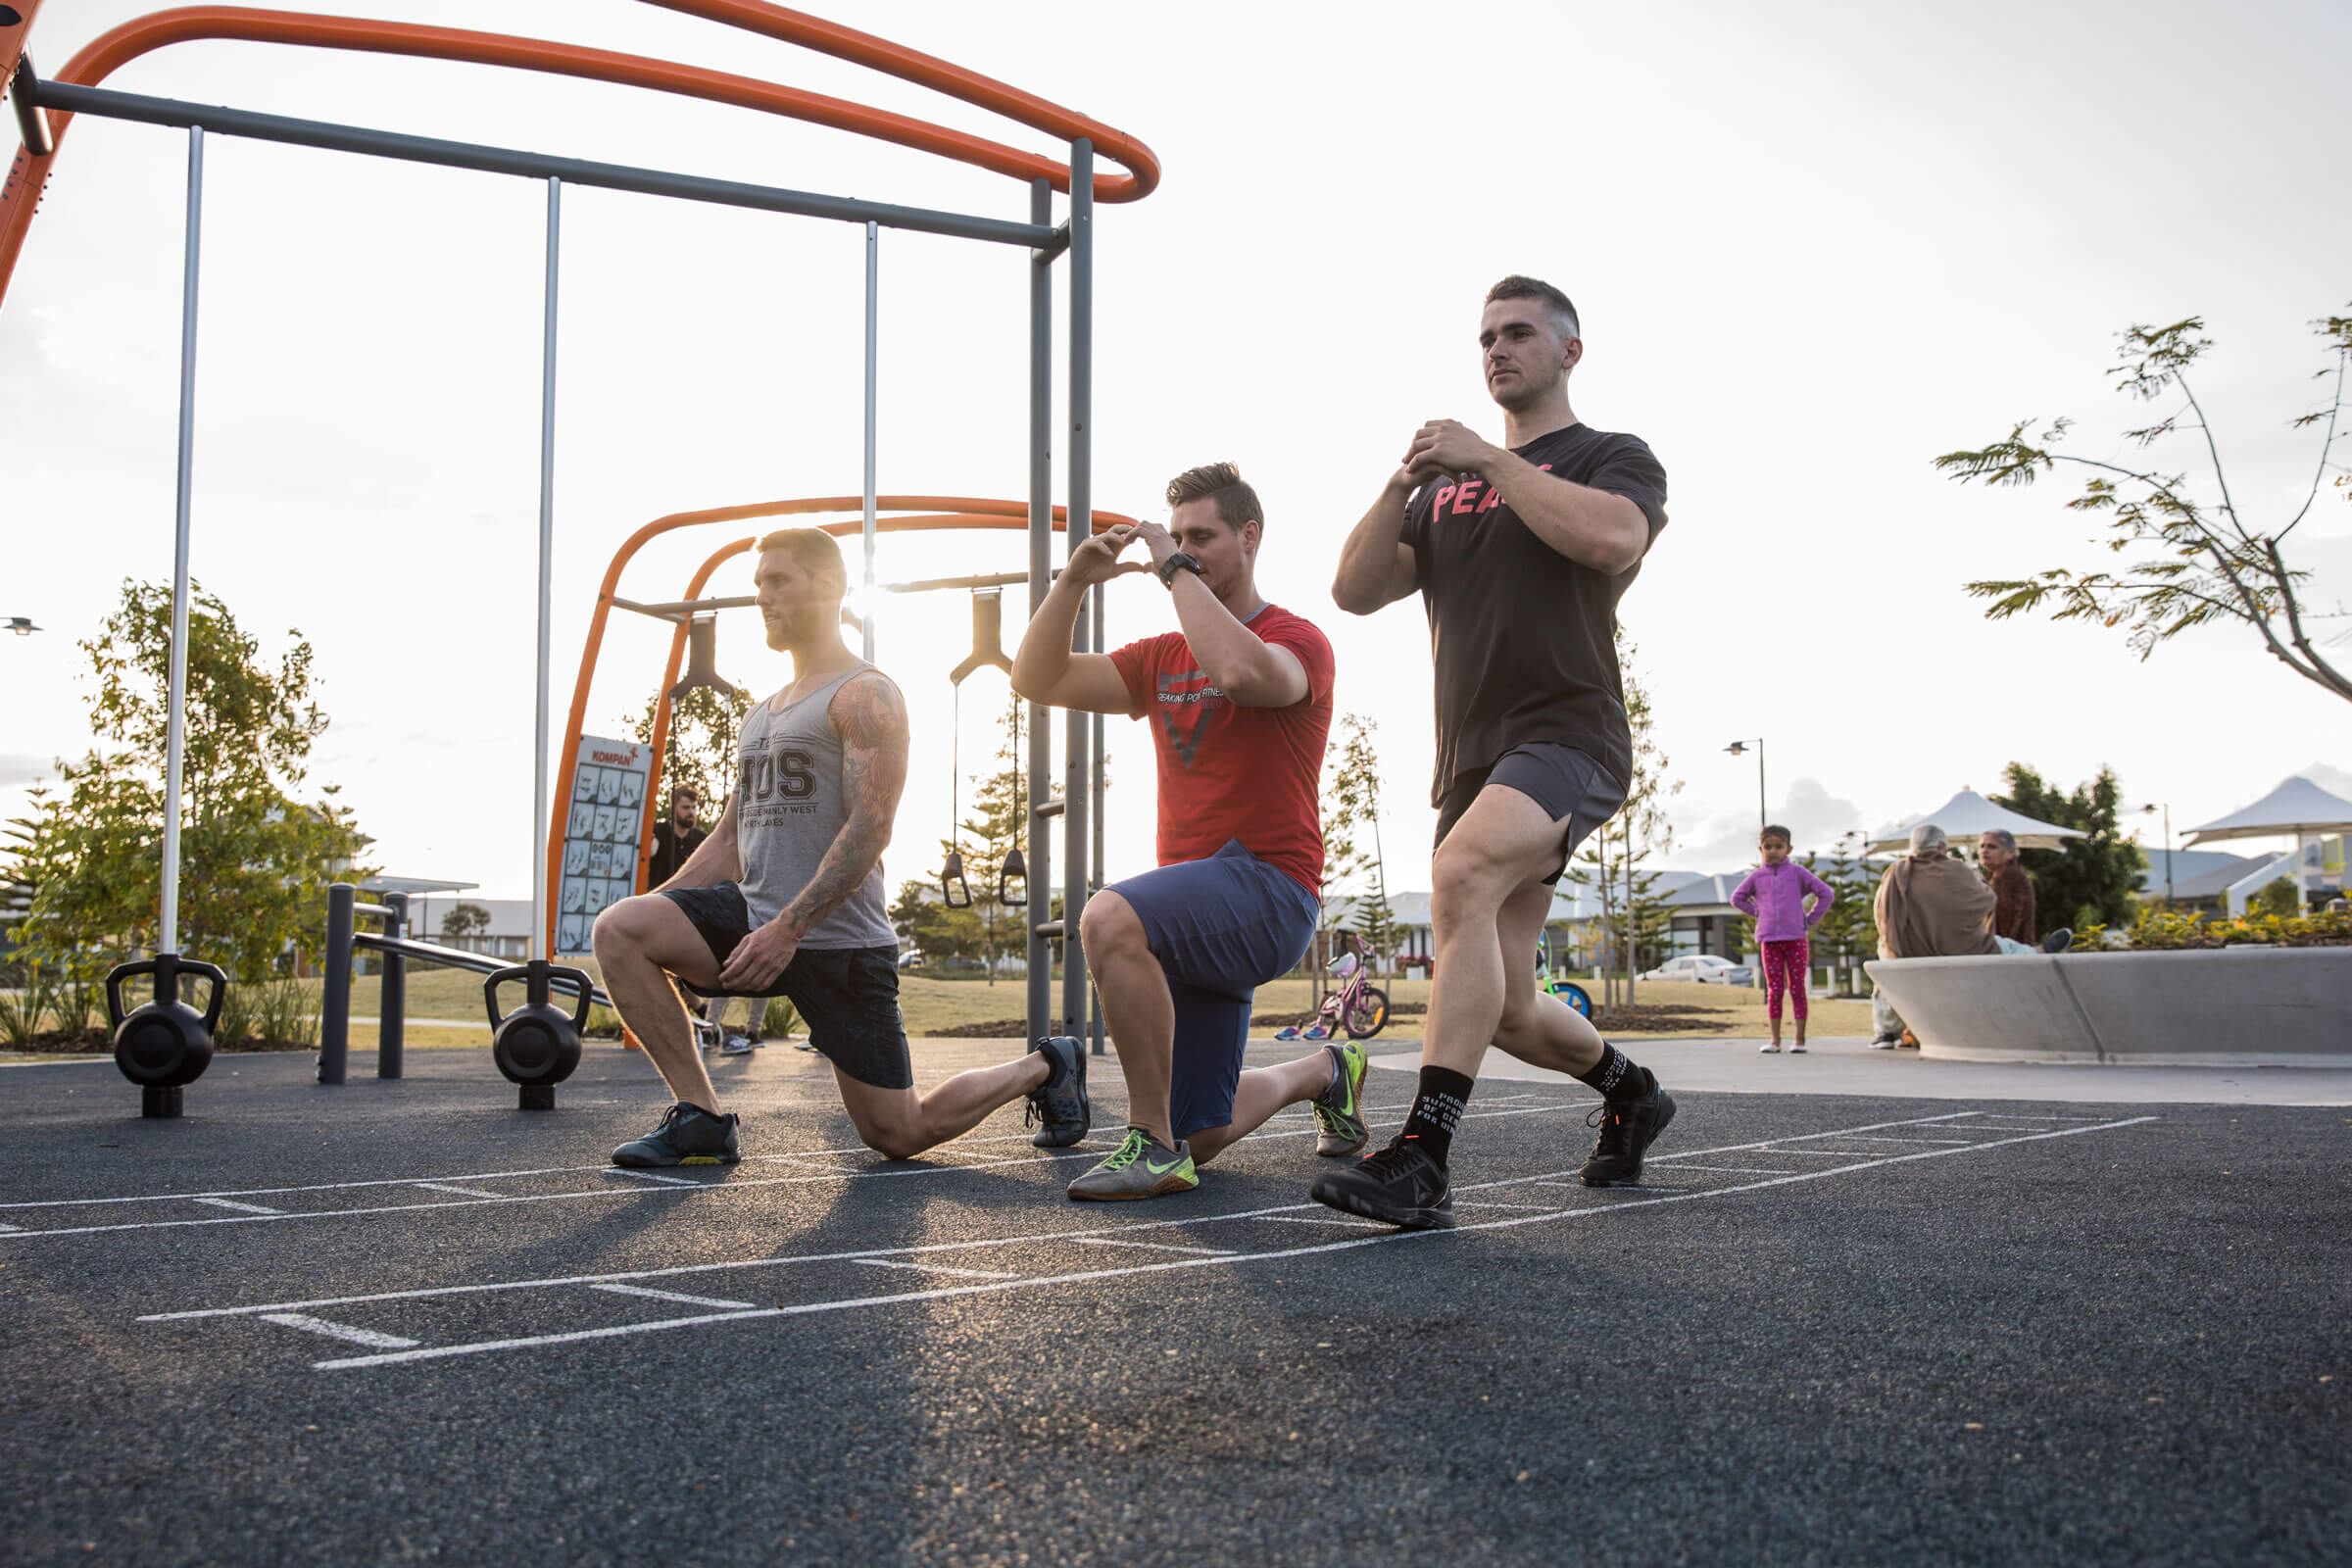 Outdoor Gym Equipment - Good For Mind, Body & Soul